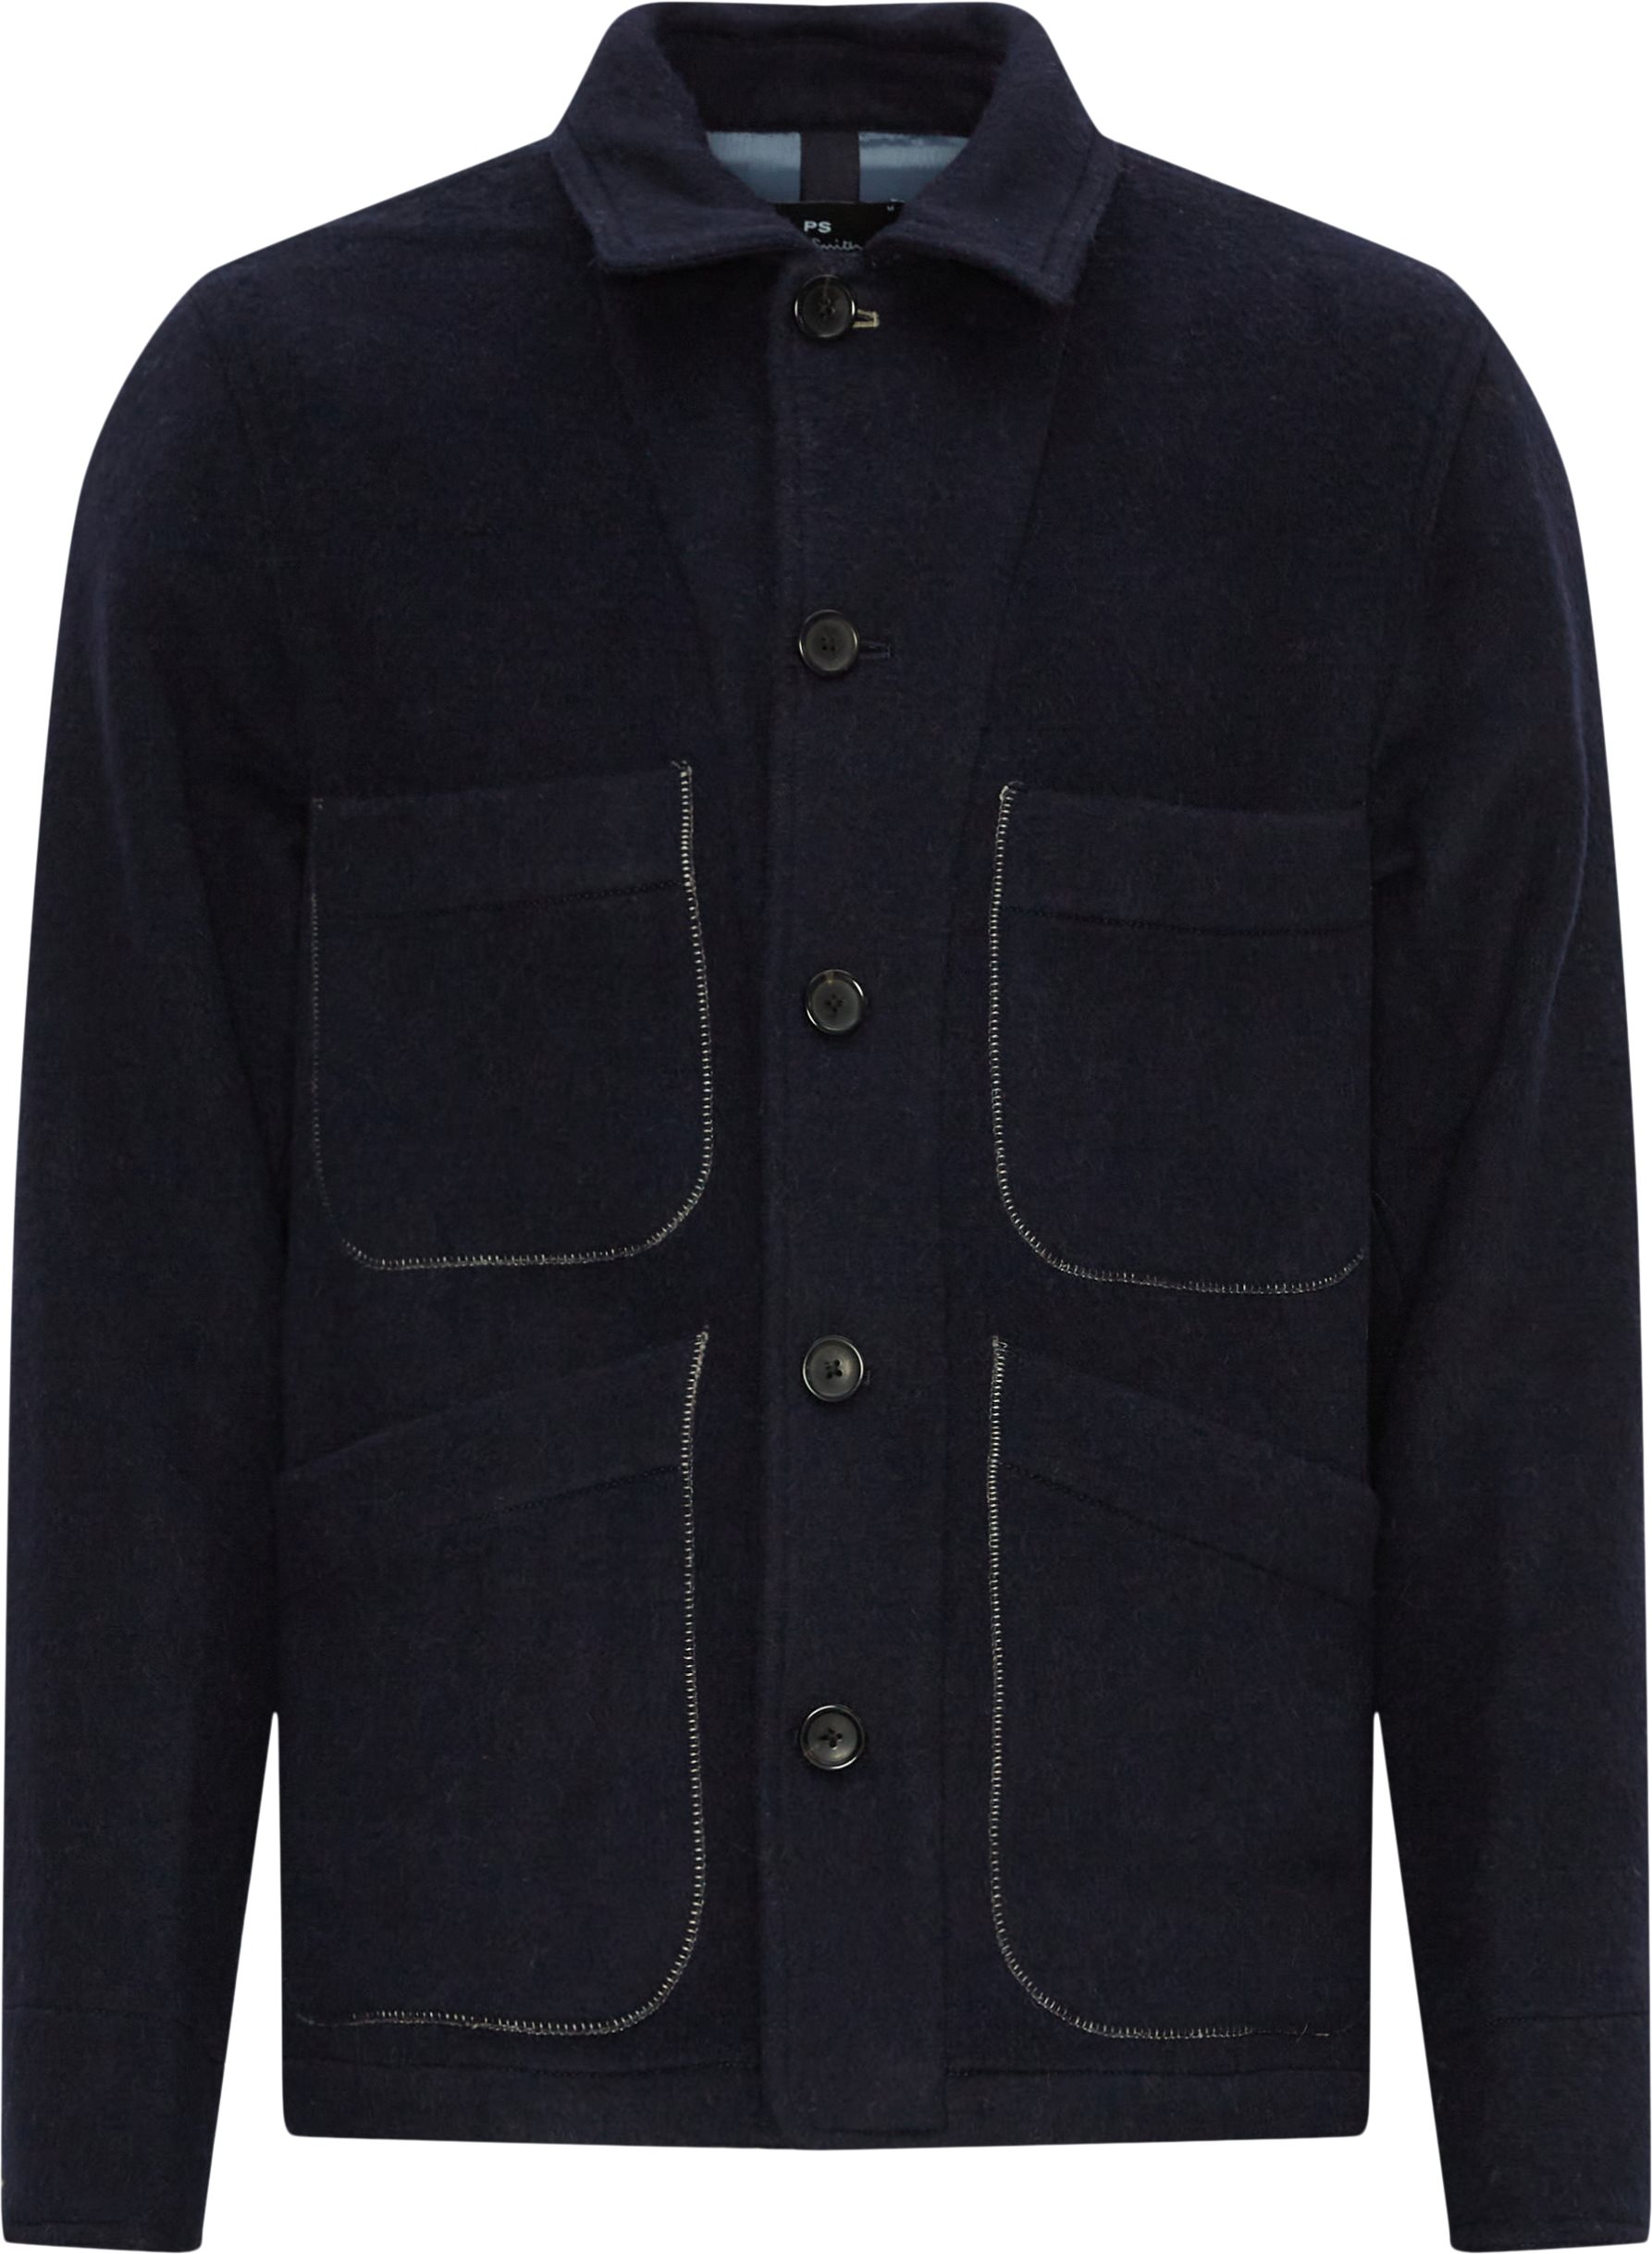 PS Paul Smith Jackets 478Y L21085 Blue